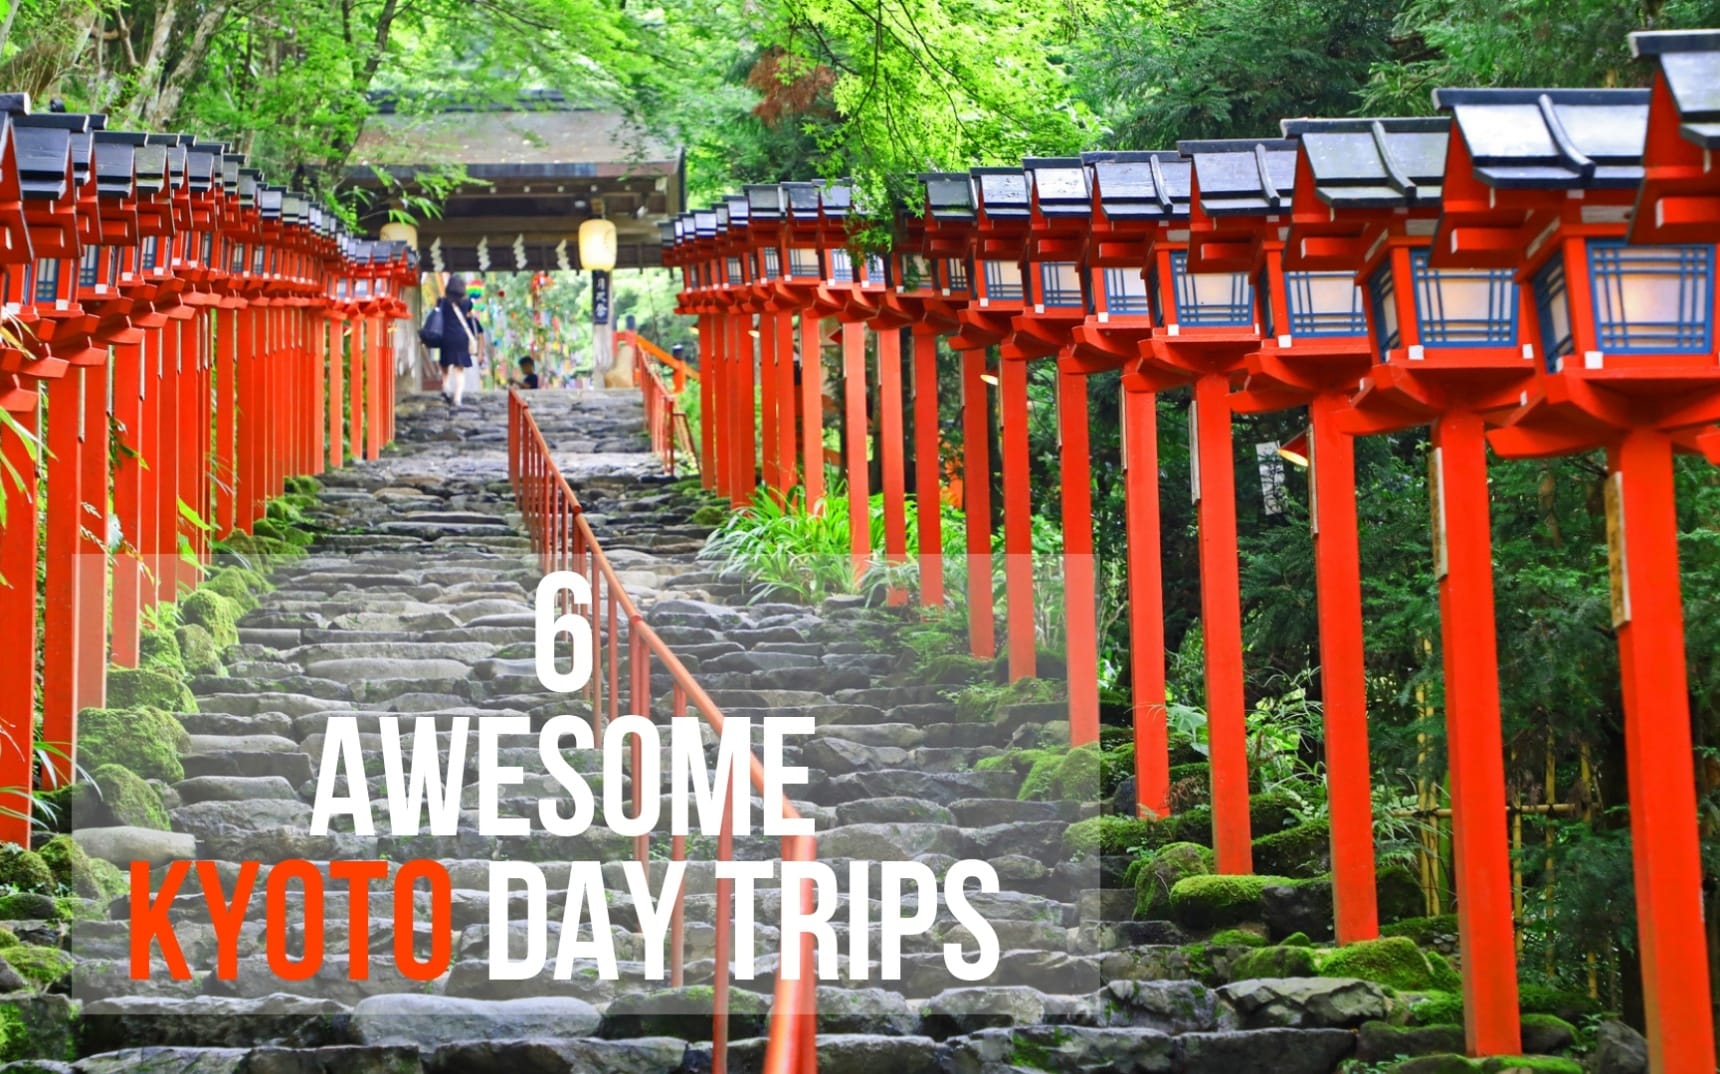 6 Awesome Day Trips from Kyoto